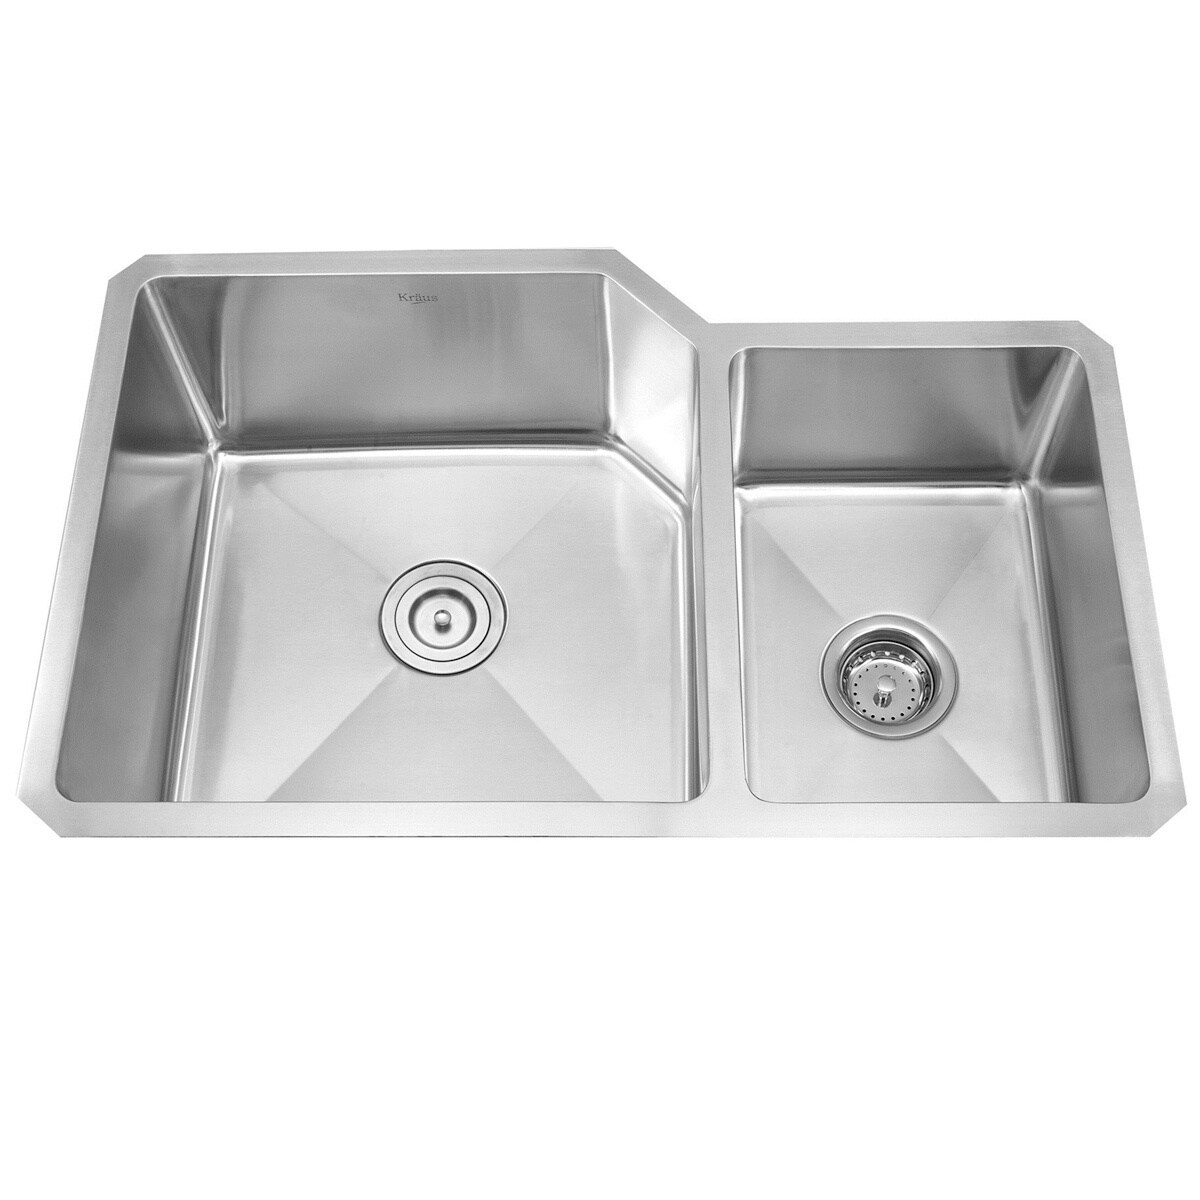 https://ak1.ostkcdn.com/images/products/4370524/Kraus-Kitchen-Combo-Set-Stainless-Steel-32-inch-Undermount-Sink-with-Faucet-fd3e819d-9742-4722-8d85-f8fd6c48f6fe.jpg